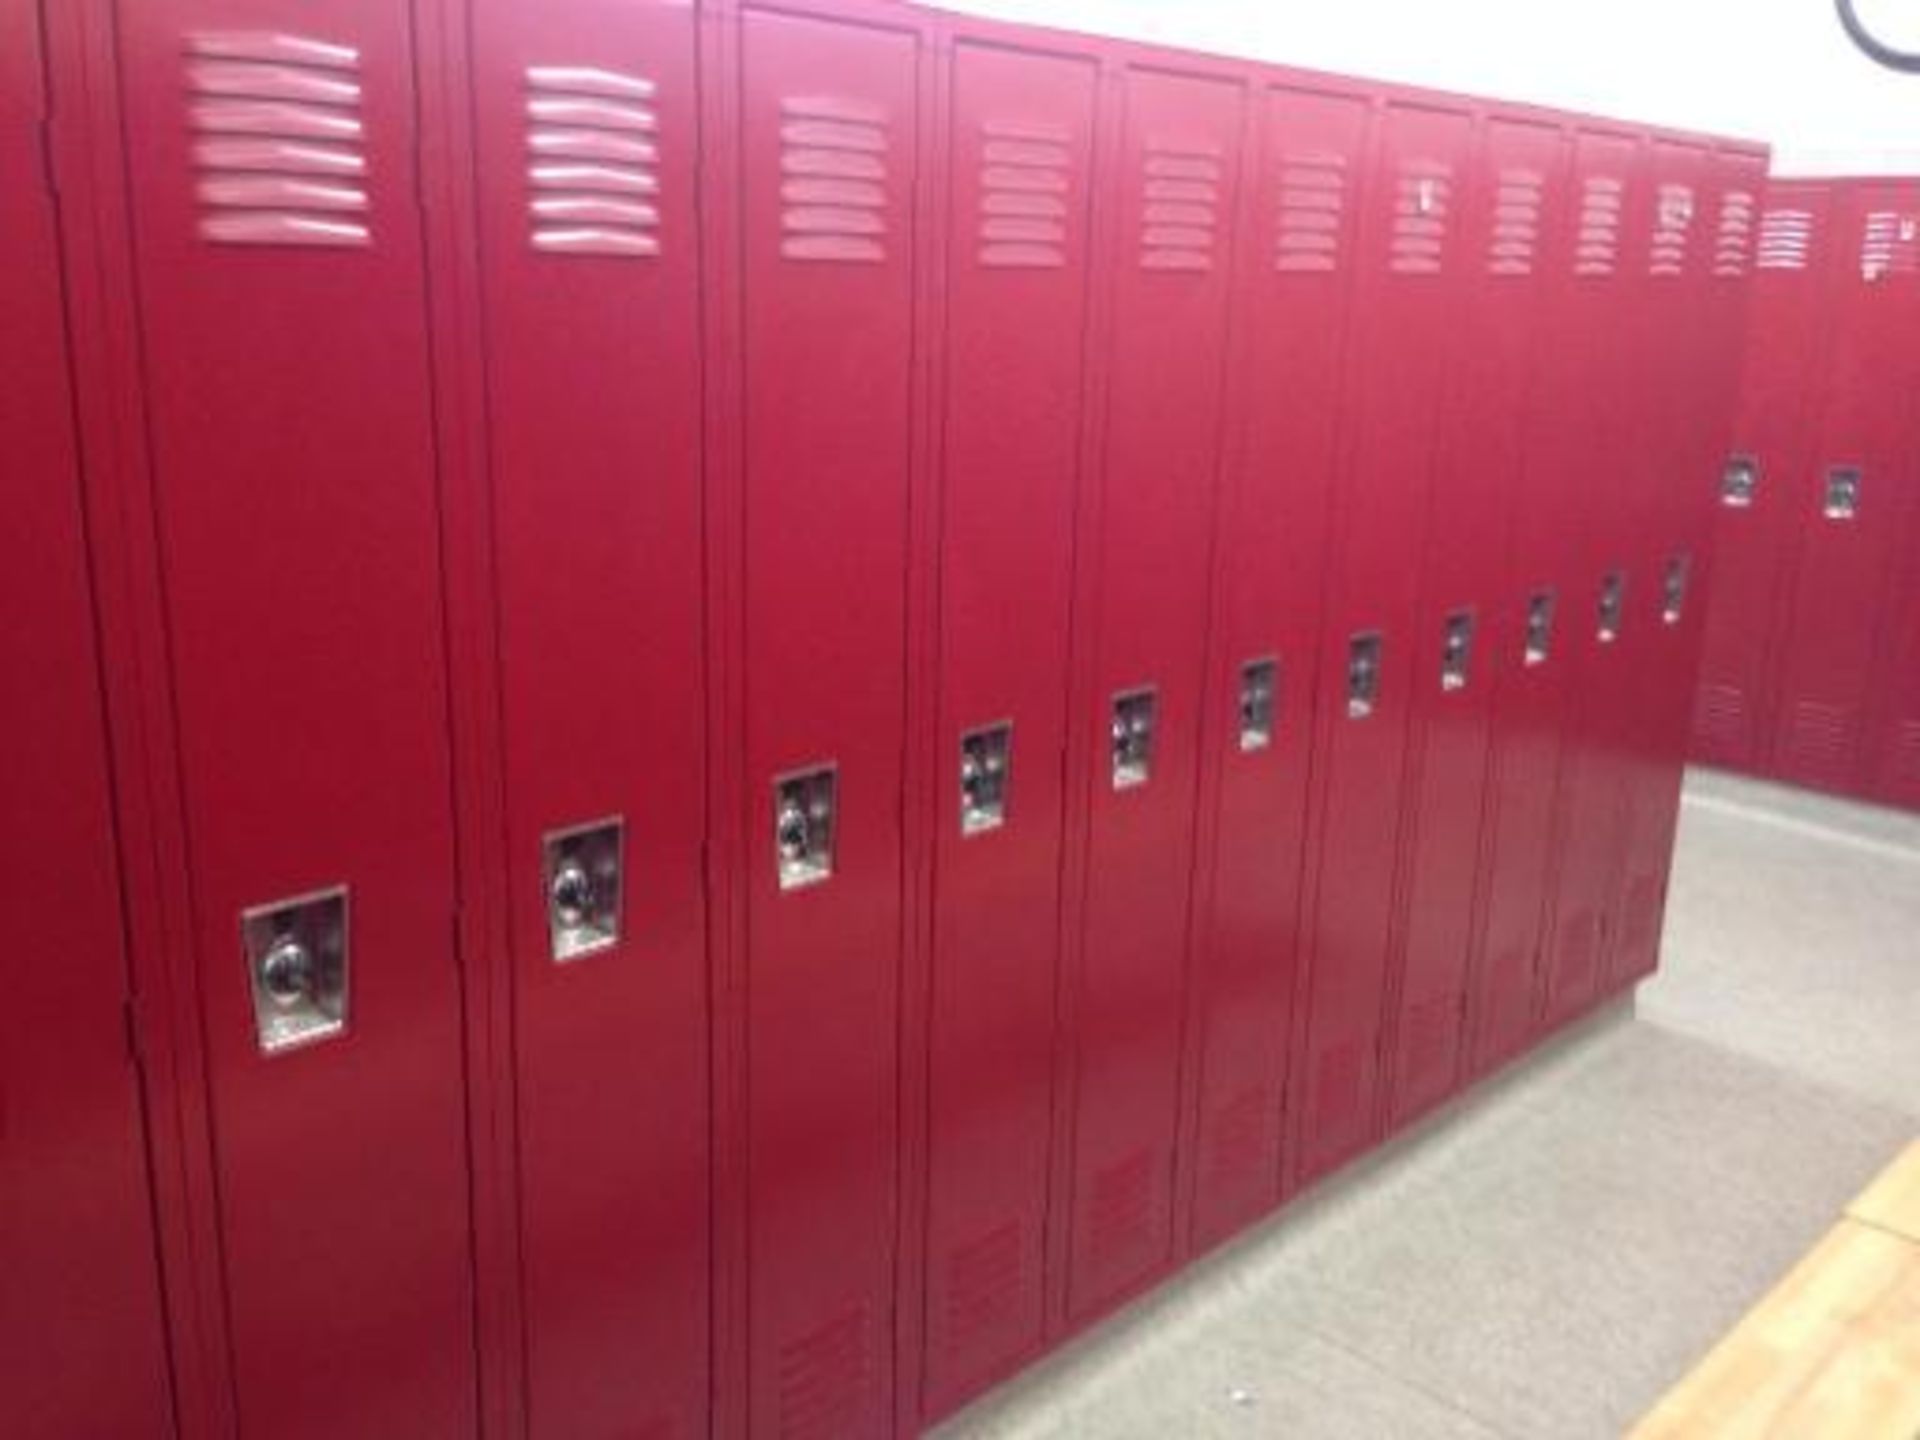 (201) men and women's lockers, Room 4521. Located in Marion, Ohio Rigging Fee: $600